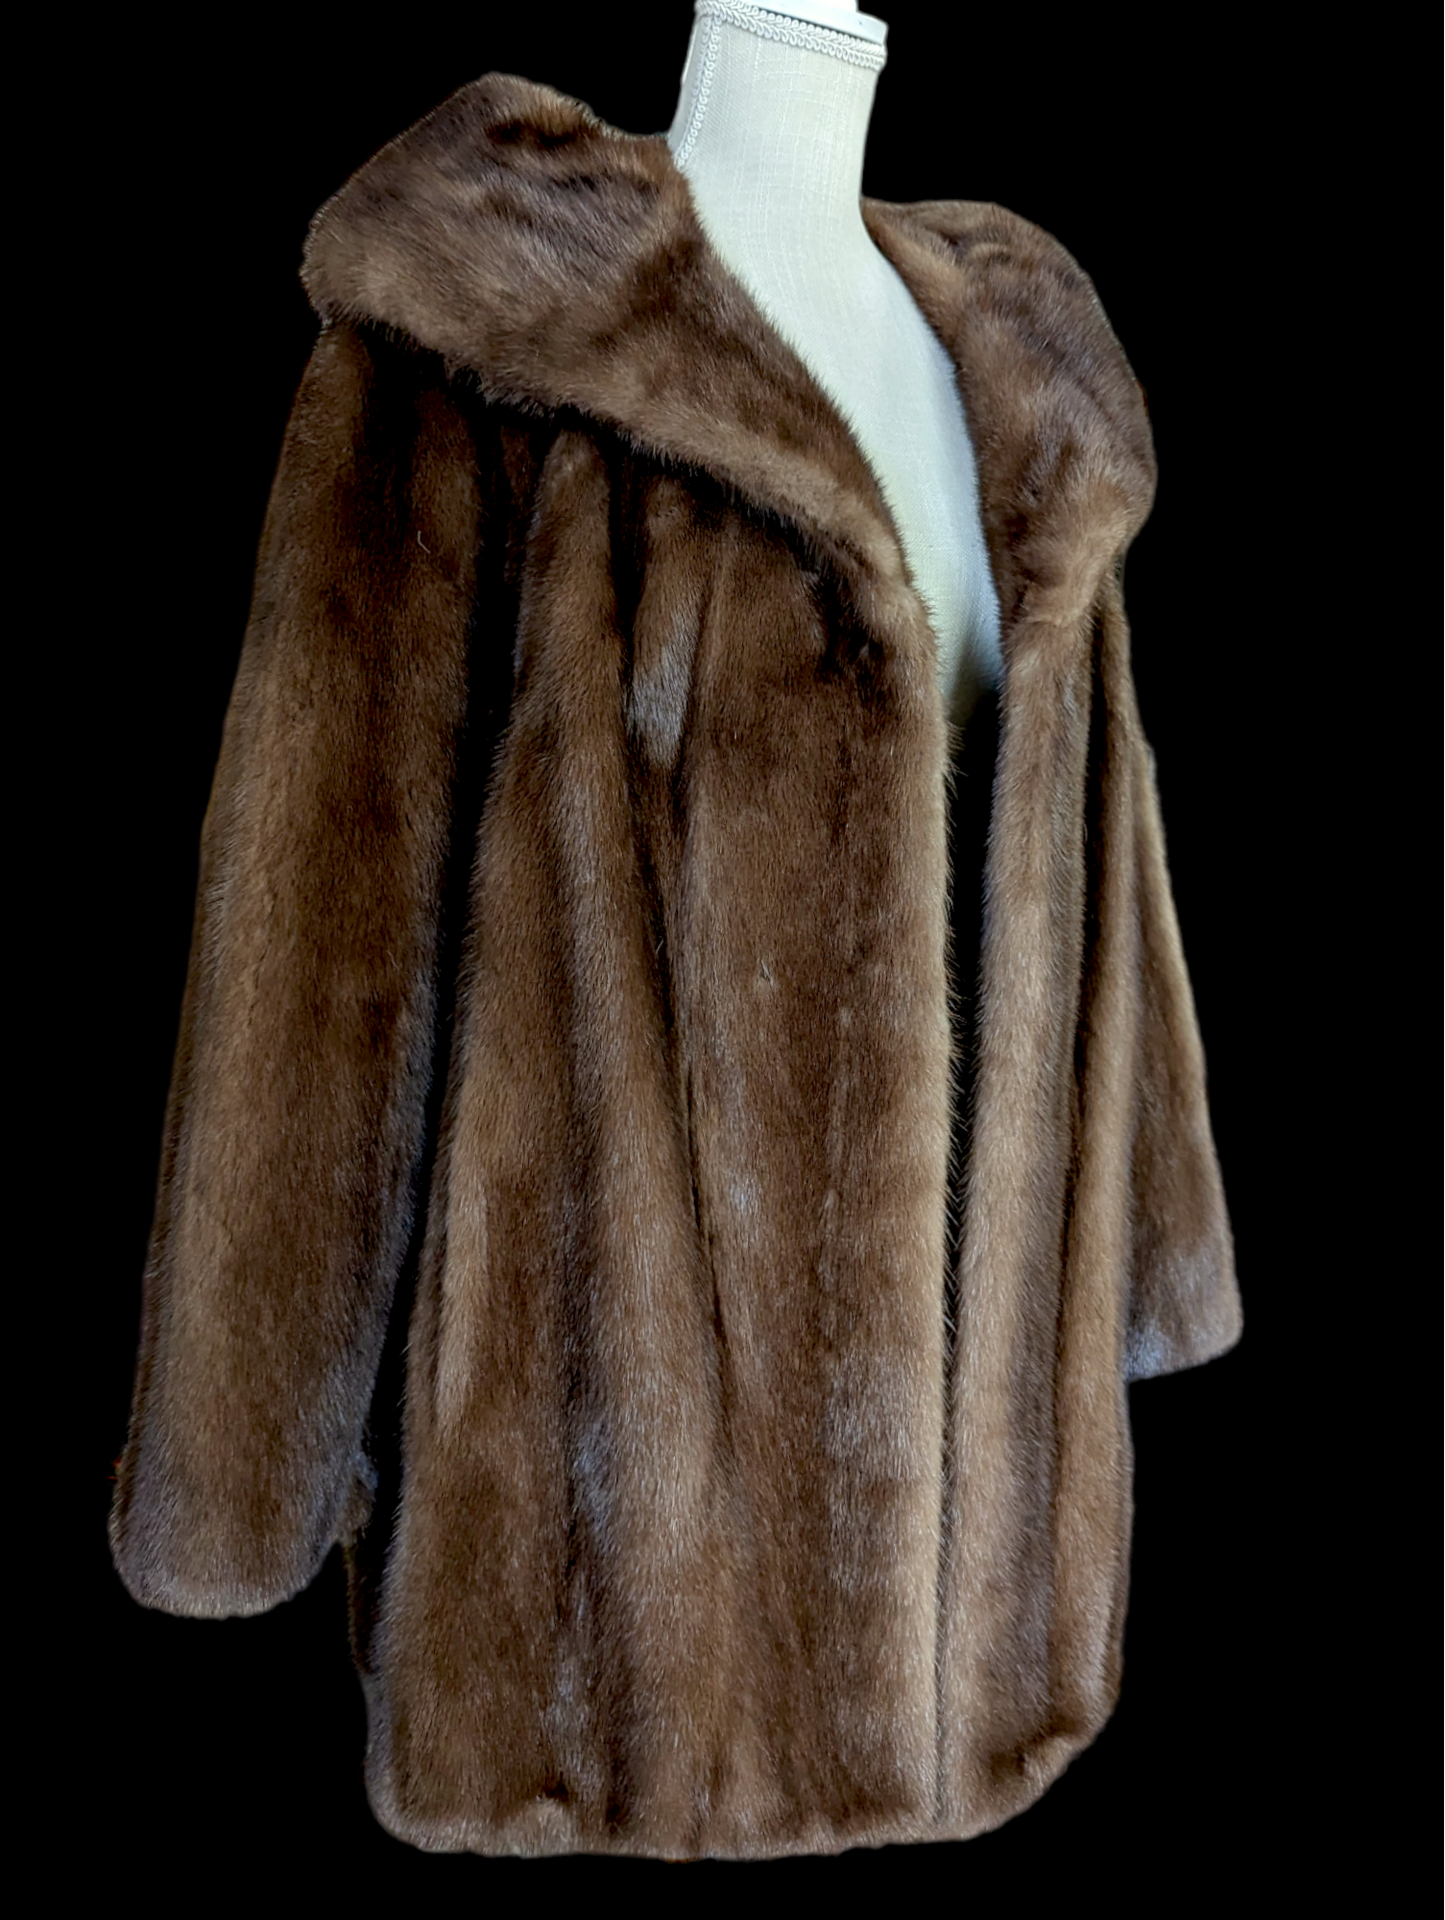 1950s Mink Mid-Length Fur Coat in Chestnut with Large Collar, Pockets and Satin Lining